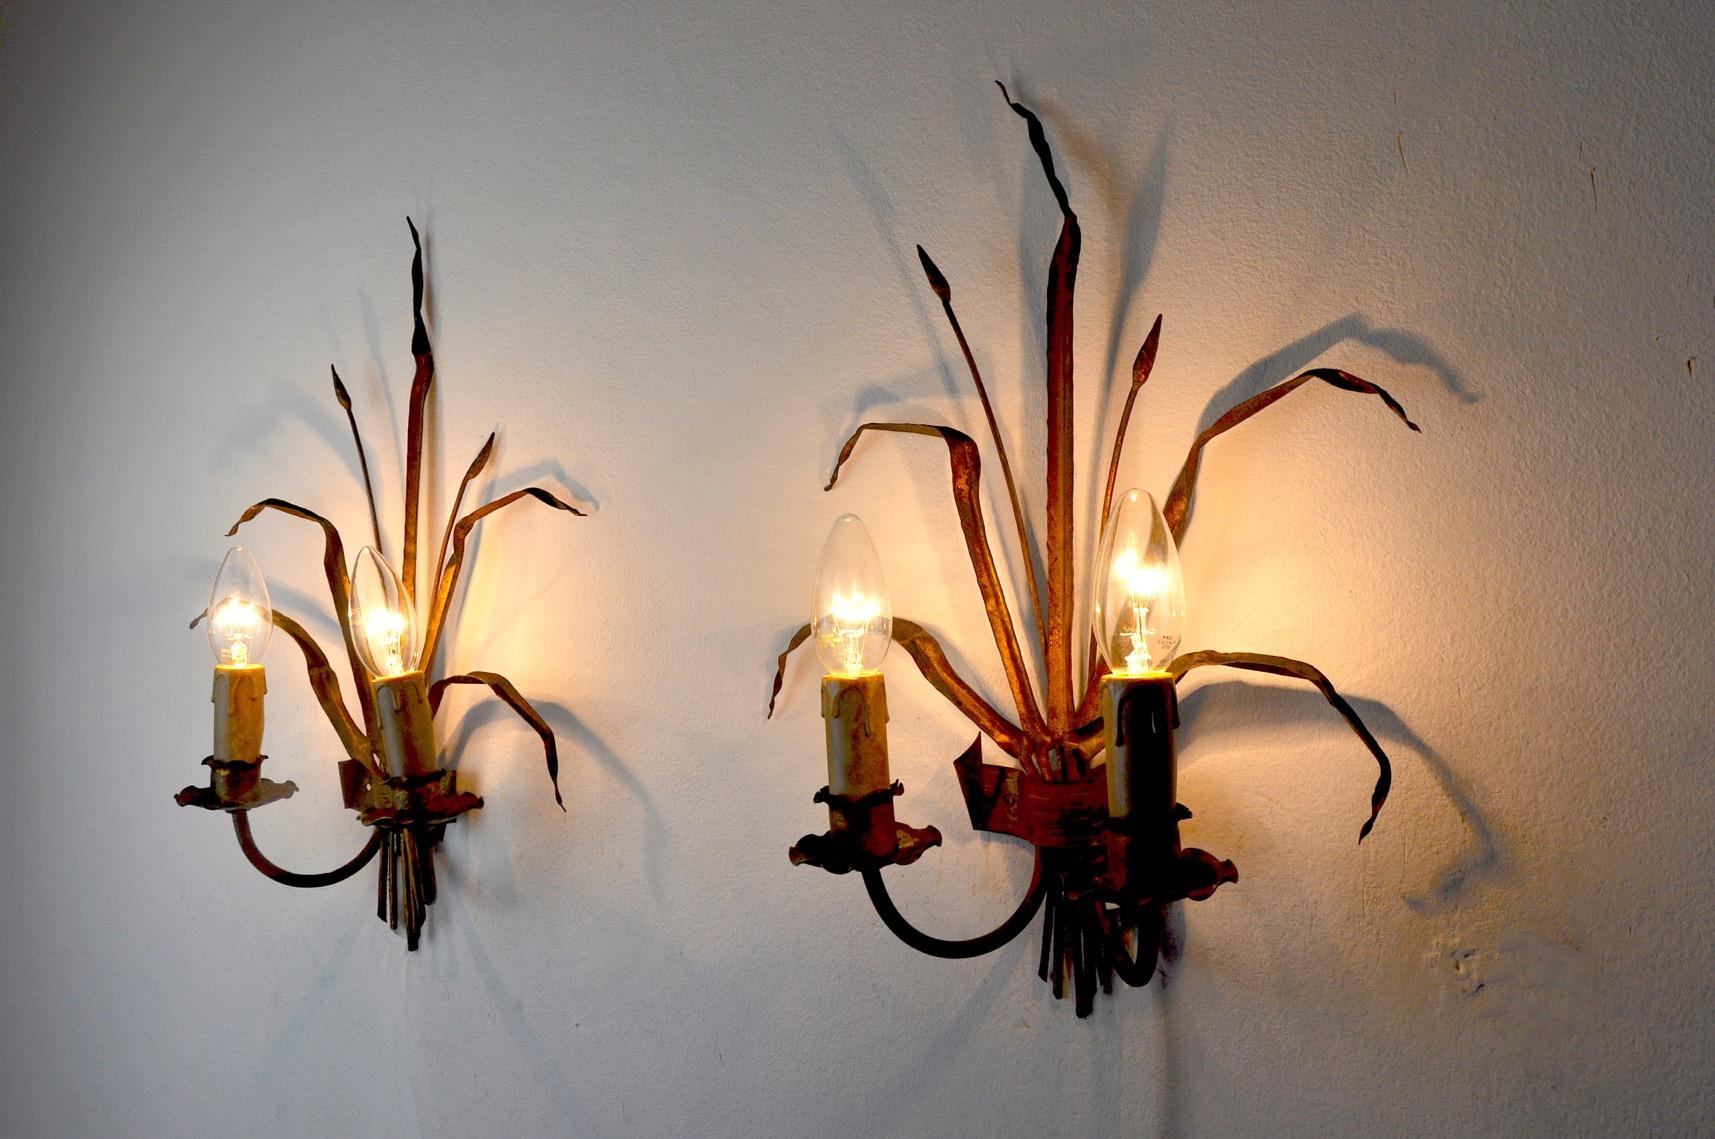 Mid-20th Century Pair of Floral Wall Lamps by Ferro Arte, Spain, circa 1960 For Sale